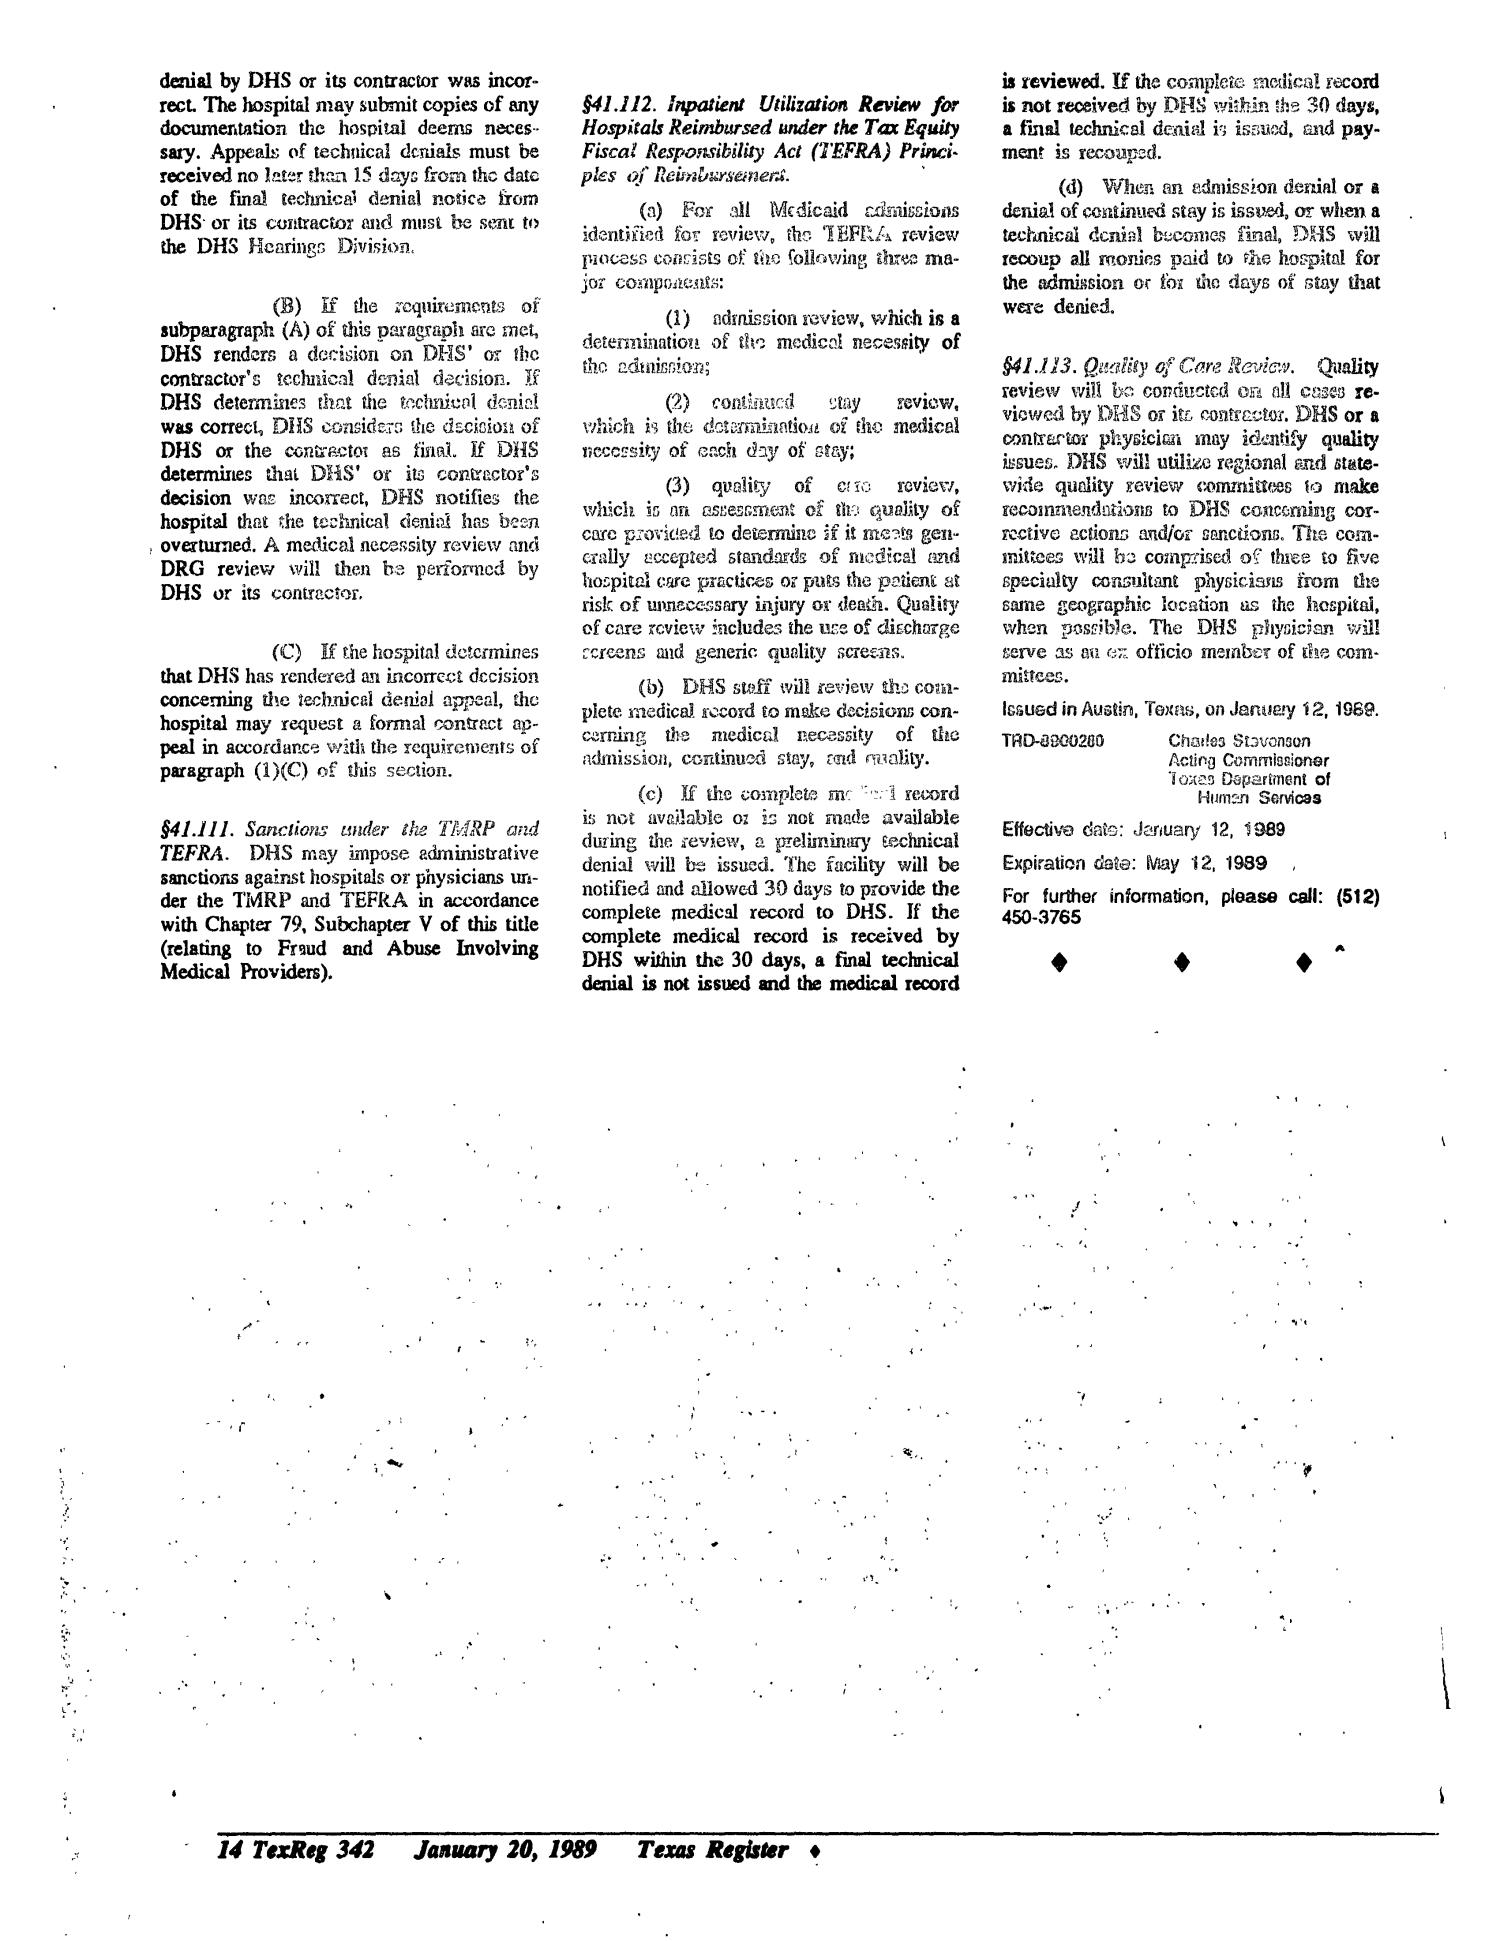 Texas Register, Volume 14, Number [6], Pages 329-475, January 20, 1989
                                                
                                                    342
                                                